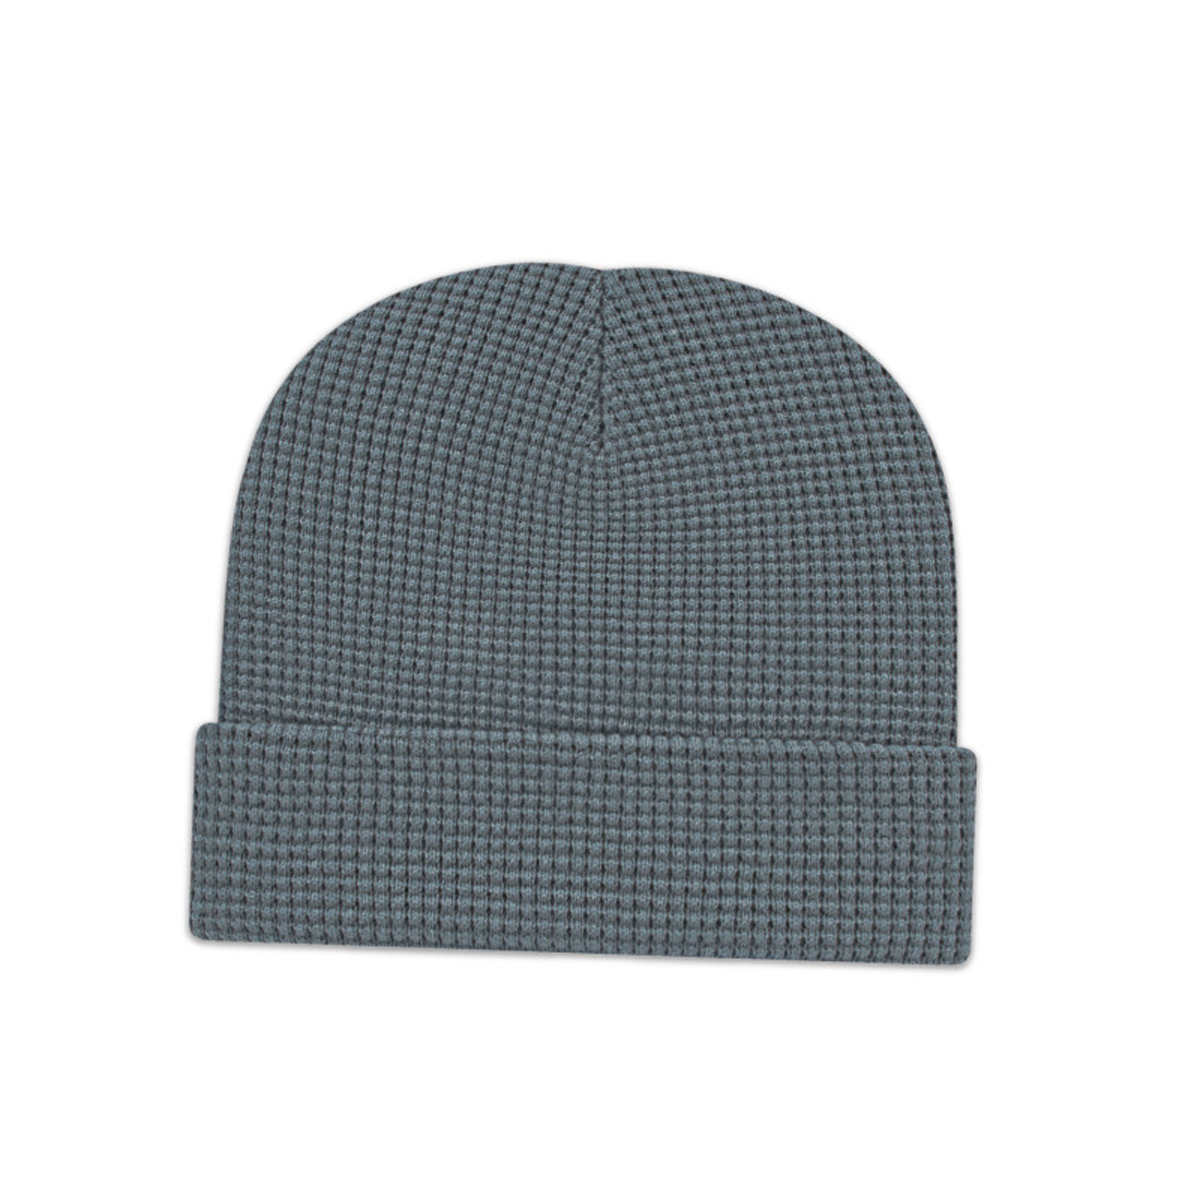 CAP AMERICA WAFFLE KNIT WITH CUFF TOQUE